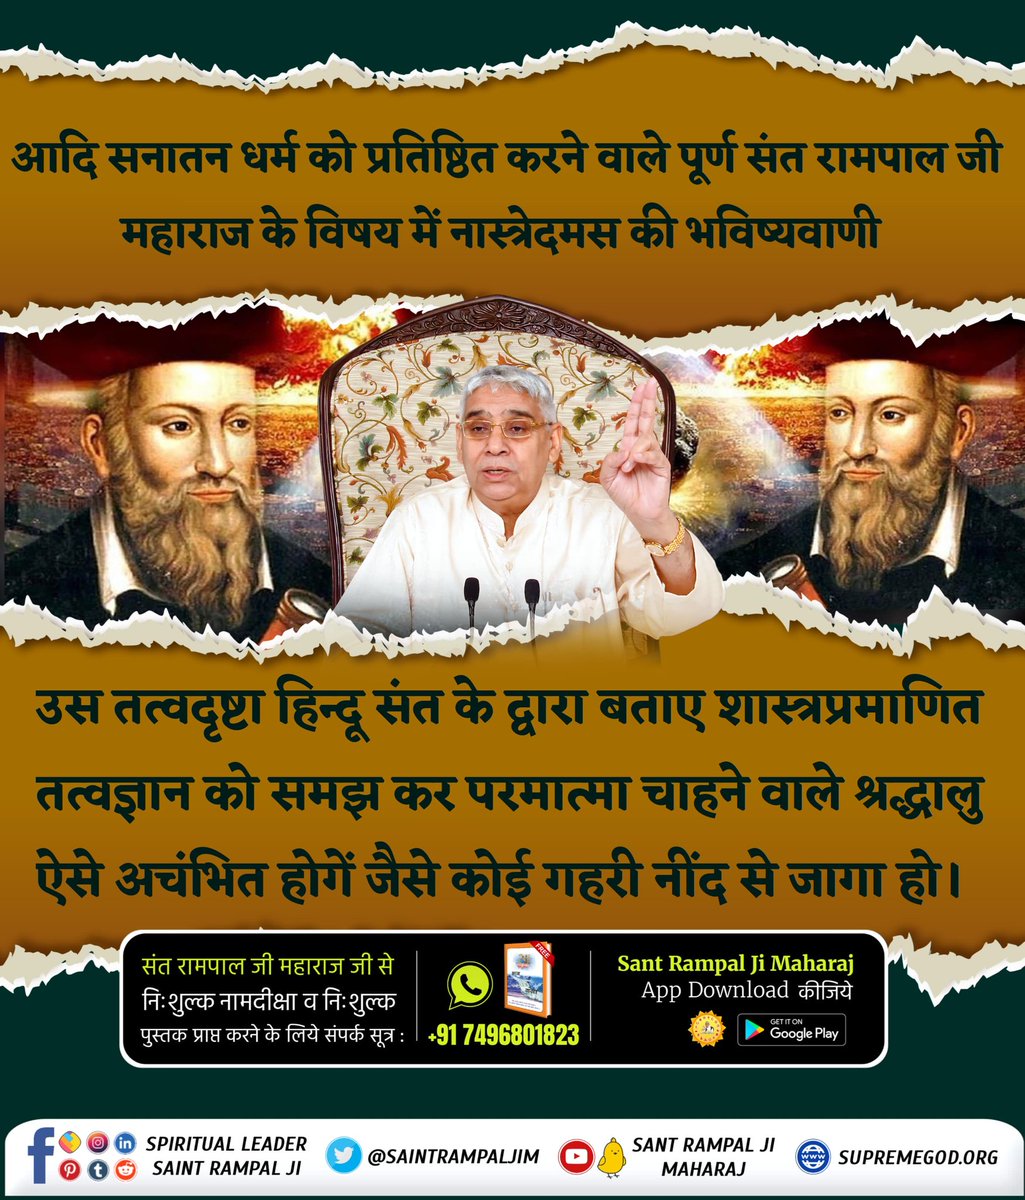 #आदि_सनातनधर्म_होगाप्रतिष्ठित
Nostradamus's Prediction about Purna Sant Rampal Ji Maharaj, who established ancient Sanatan Dharma.
The devotees seeking God will be amazed after understanding the scripture-based philosophy told by that wise Hindu Saint.
#GodMorningFriday